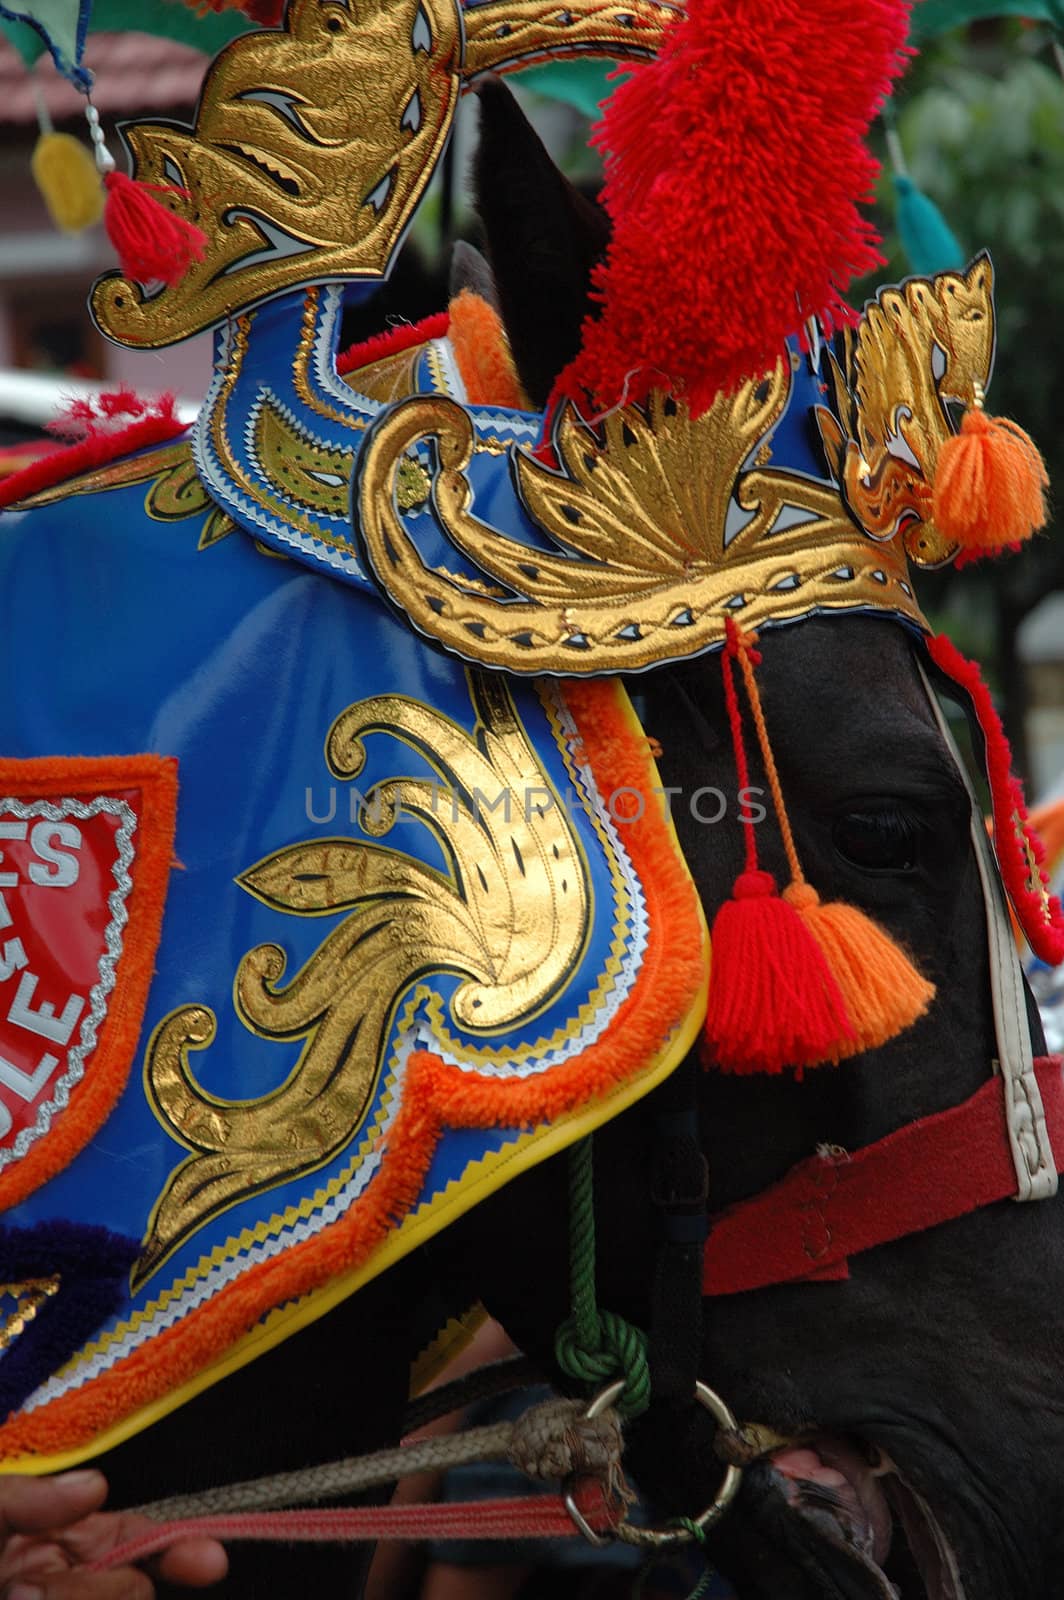 renggong horse-one of traditional ceremony heritage in indonesia